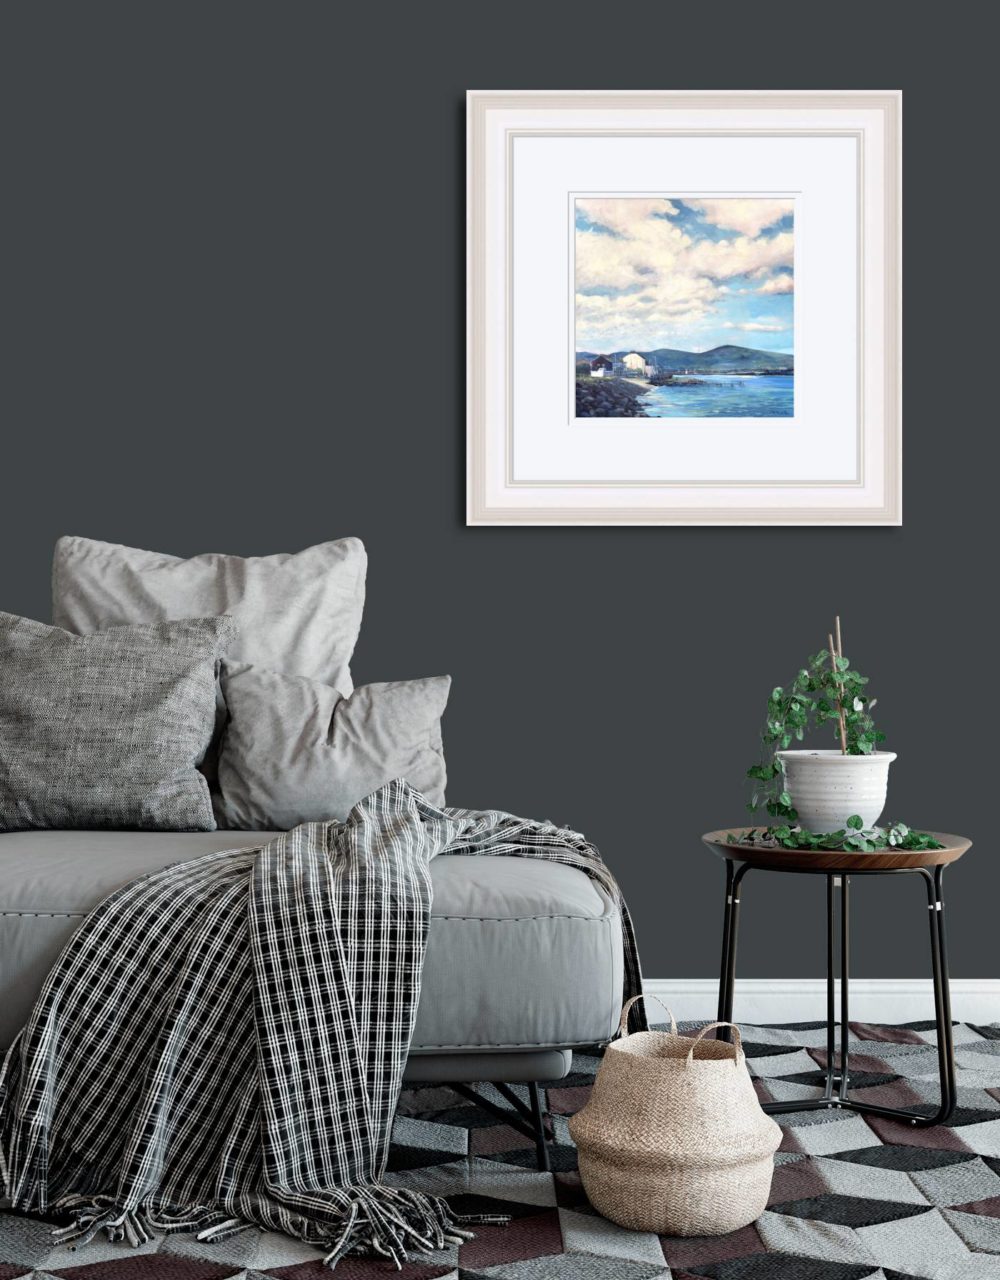 Holywood Old Pier Print (Large) In White Frame In Room